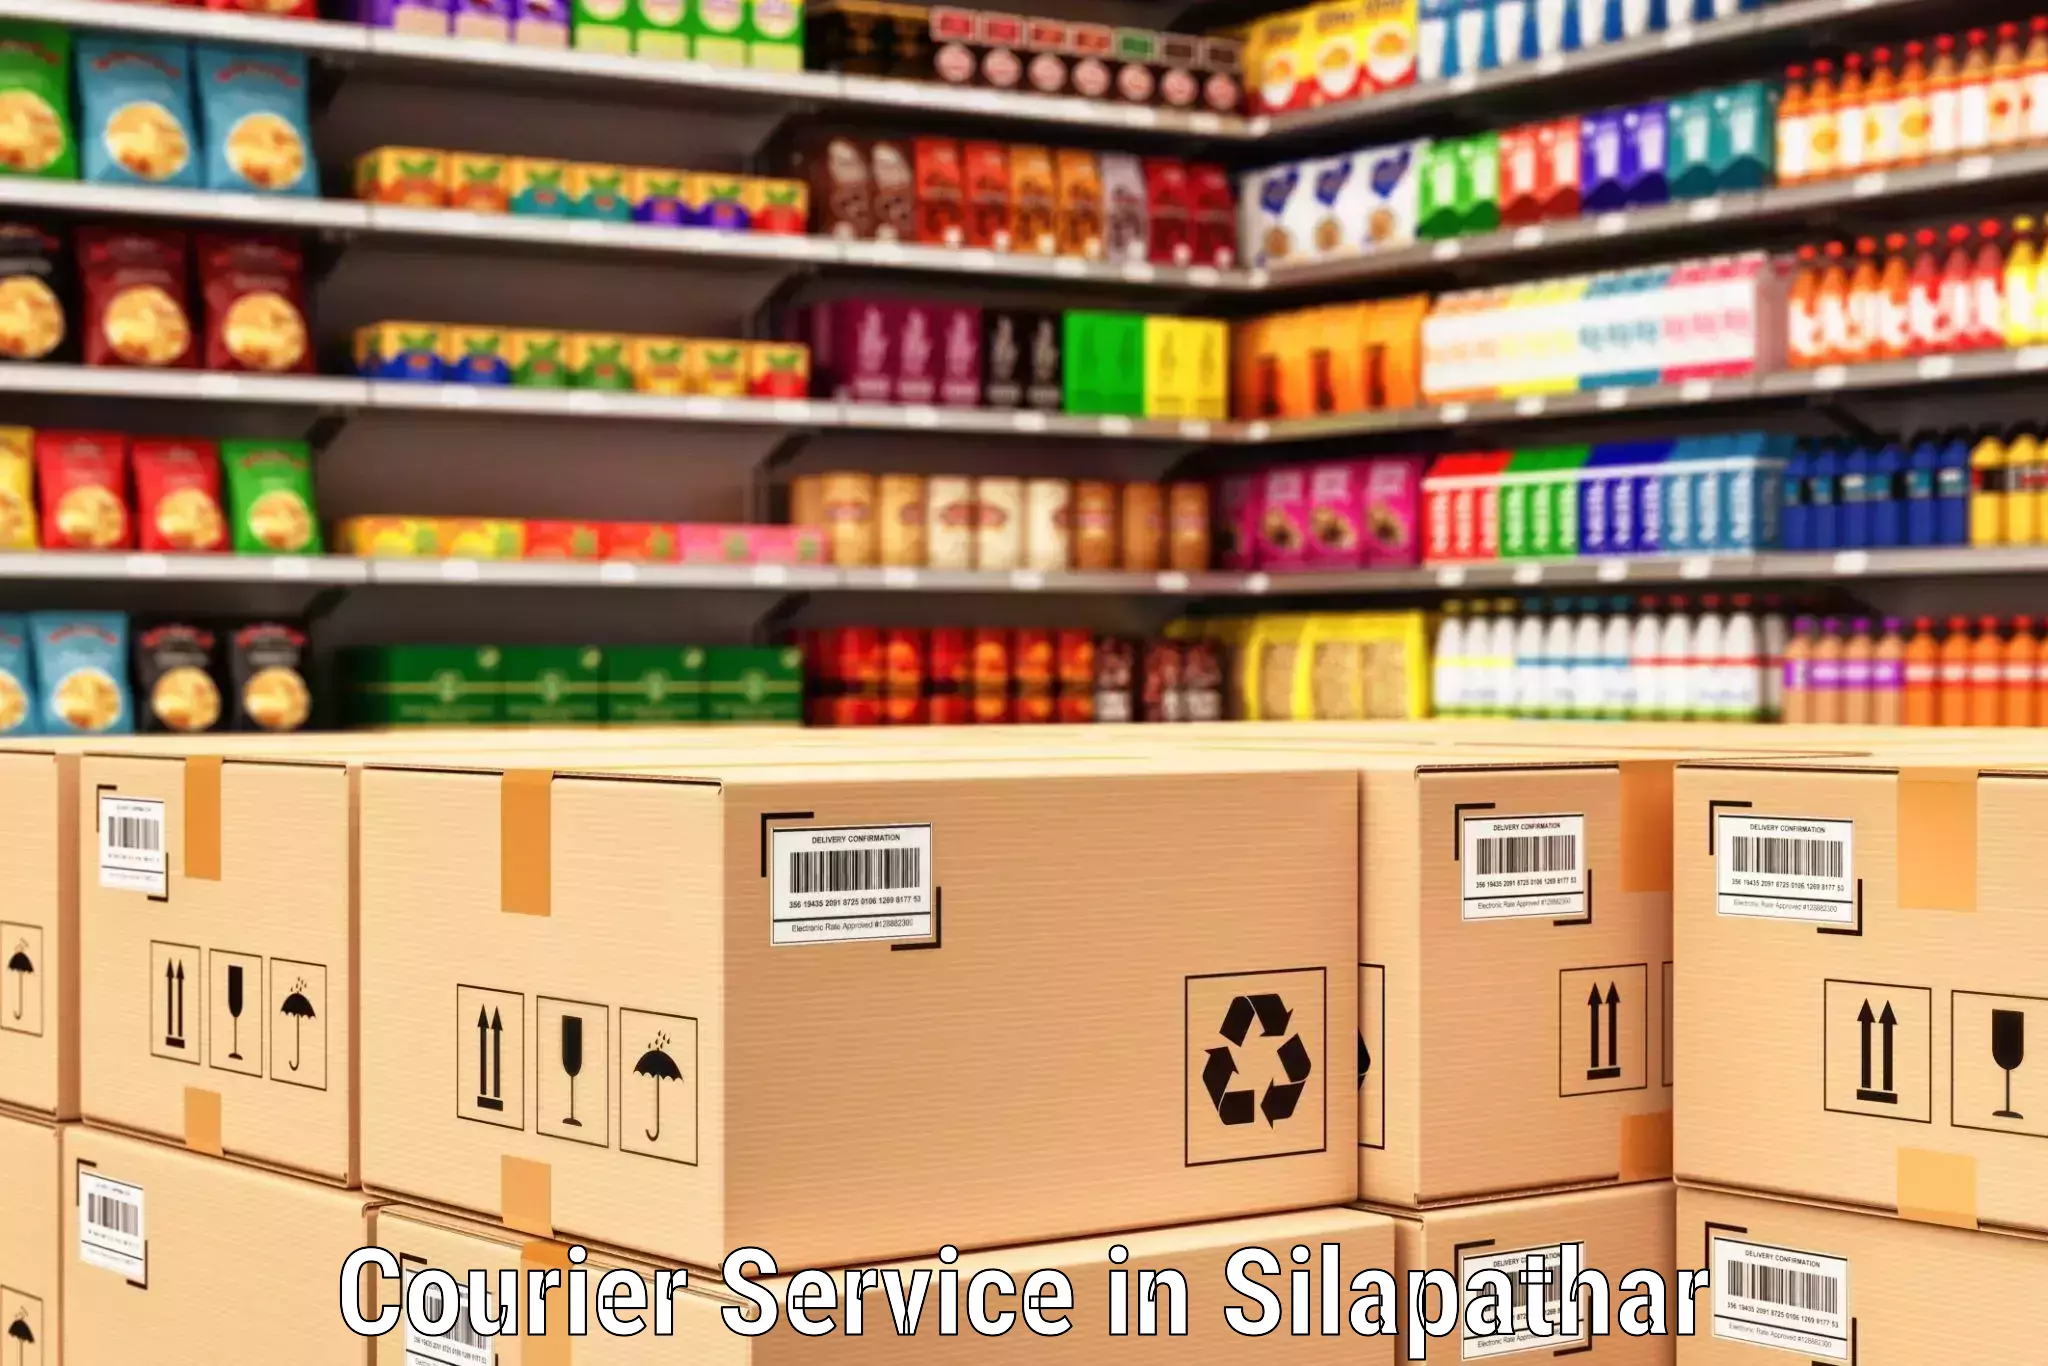 Efficient shipping operations in Silapathar